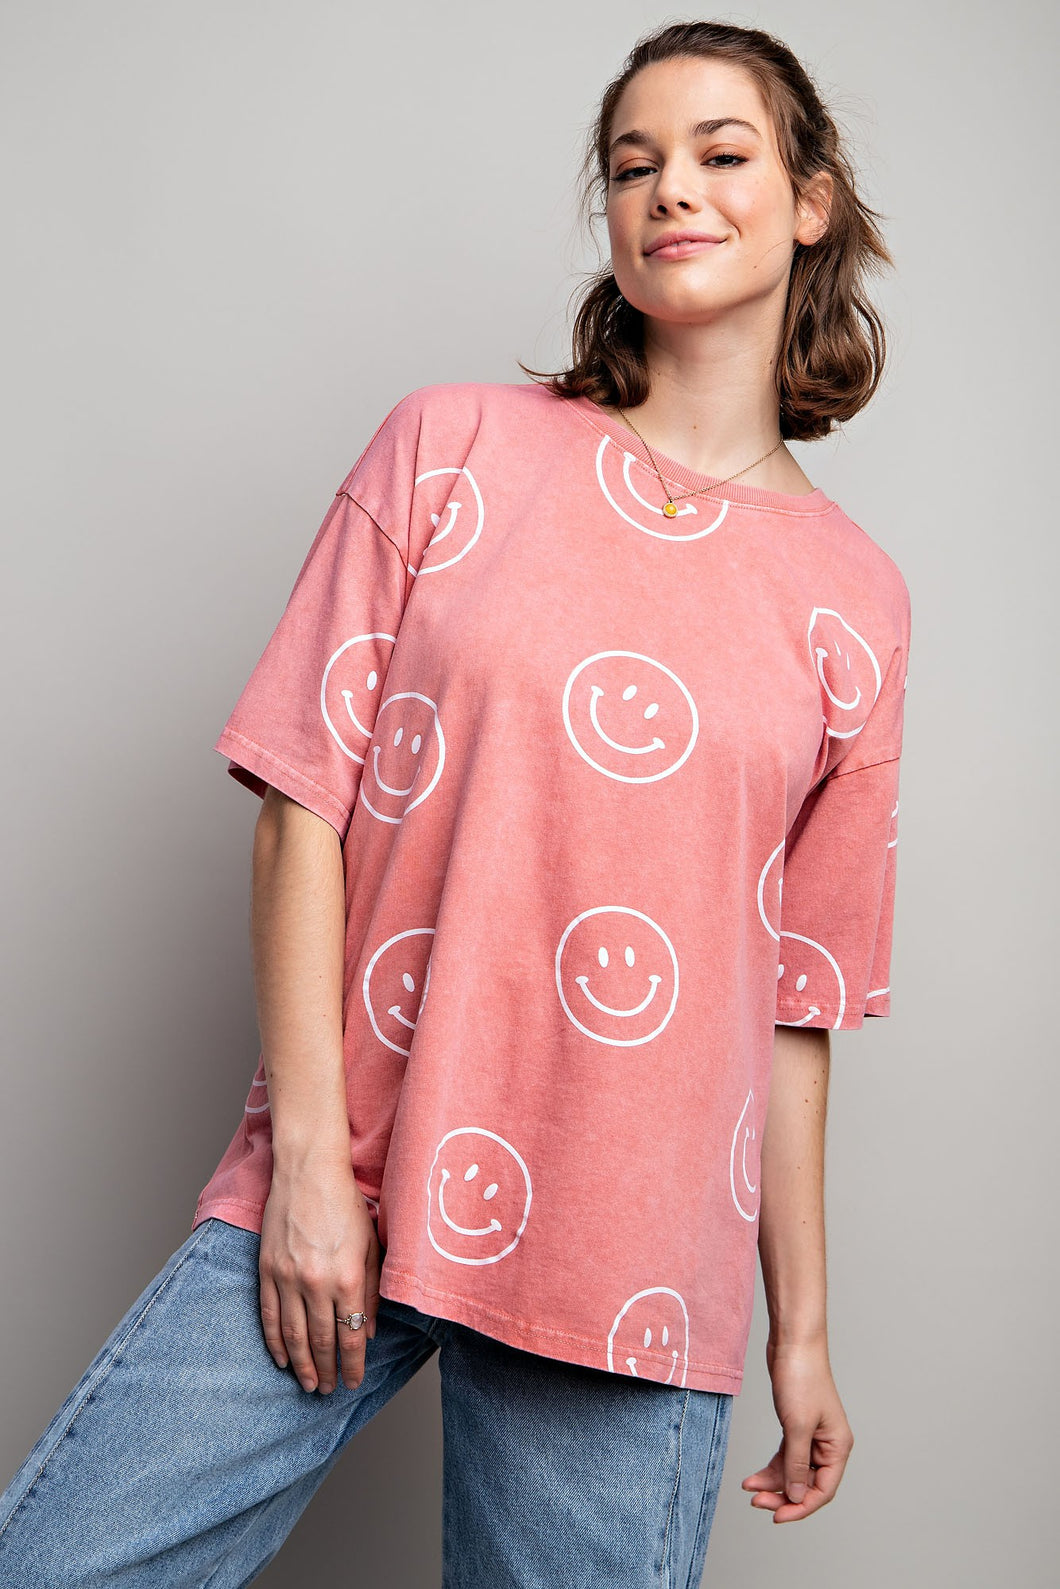 Easel Short Sleeve Smiley Face Top in Coral Shirts & Tops Easel   